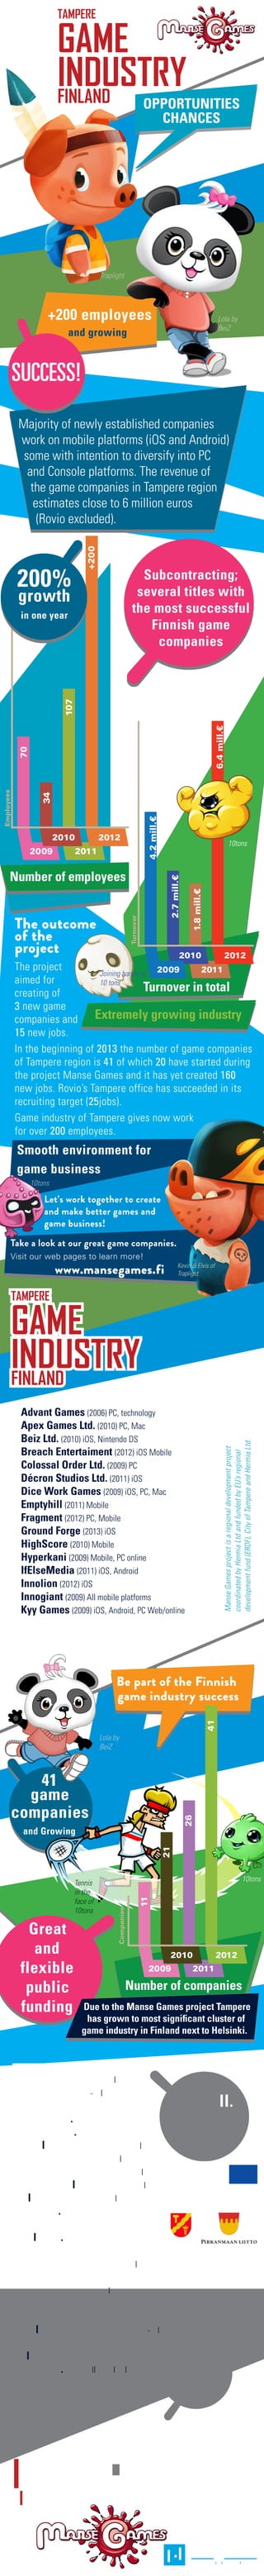 TAMPERE

GAME
INDUSTRY
FINLAND




                                BeiZ

                      Huge
          Traplight
                      growth!
 